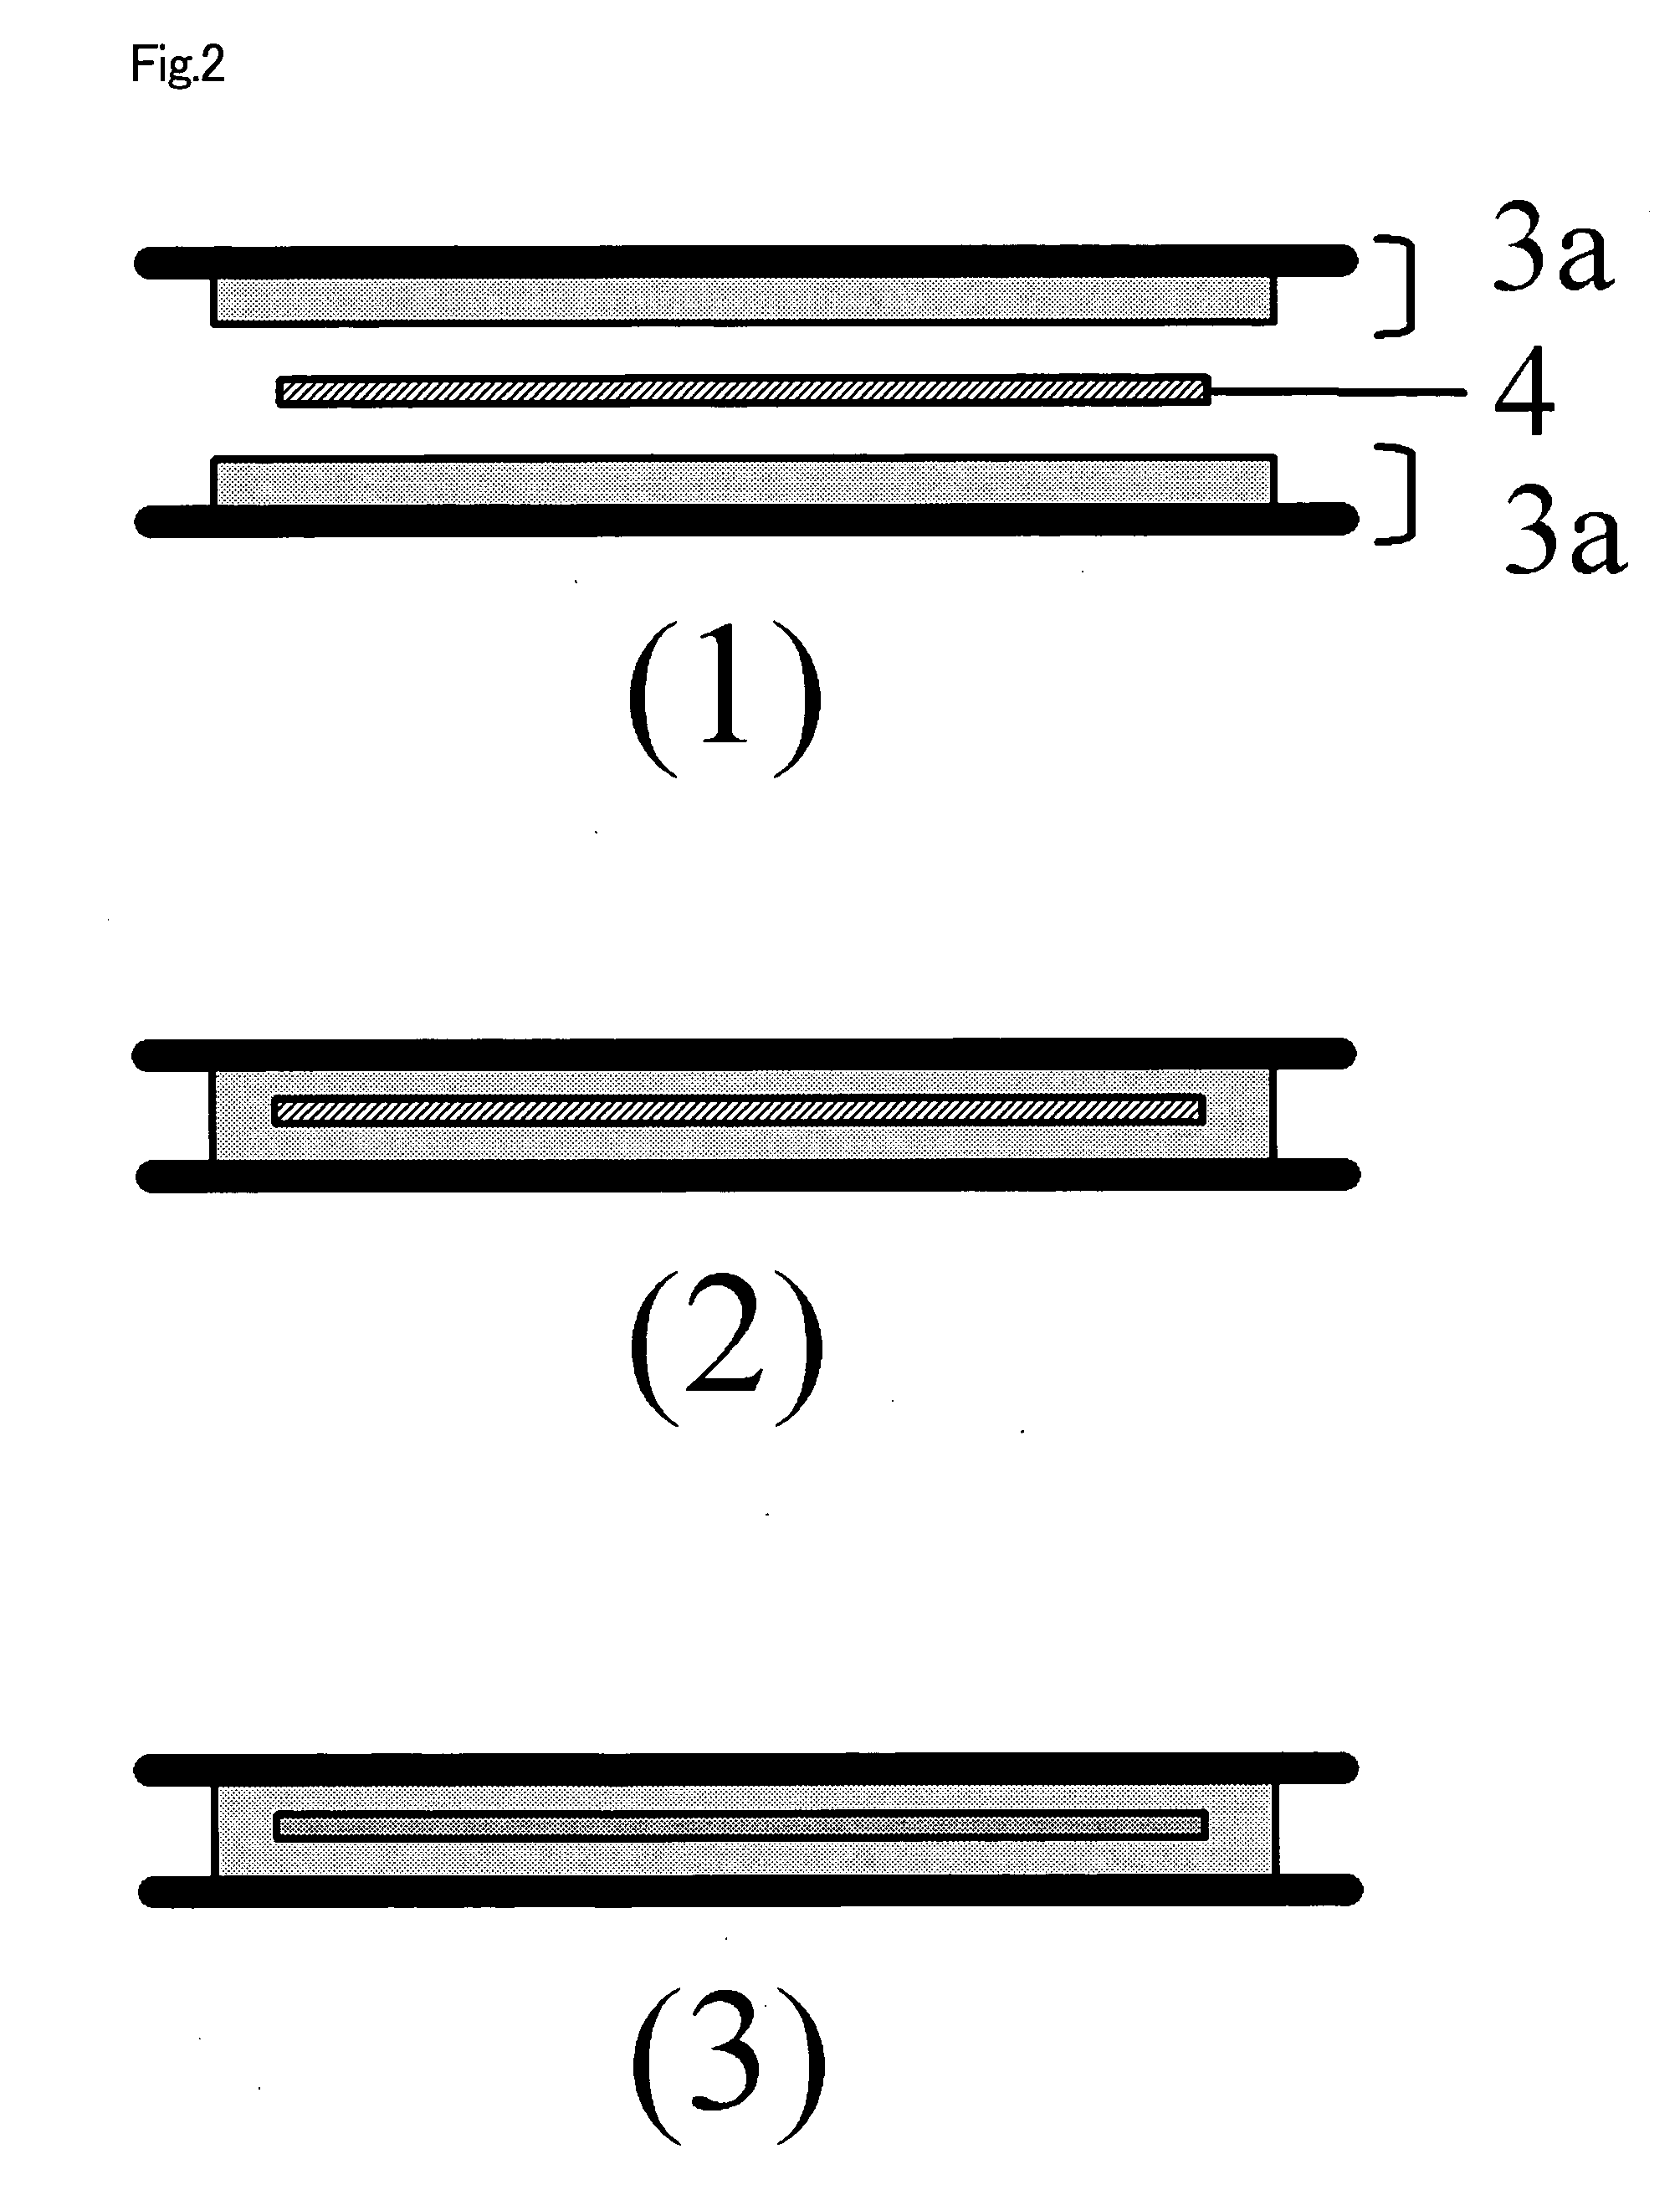 Manufacturing Process for a Prepreg with a Carrier, Prepreg with a Carrier, Manufacturing Process for a Thin Double-Sided Plate, Thin Double-Sided Plate and Manufacturing Process for a Multilayer-Printed Circuit Board